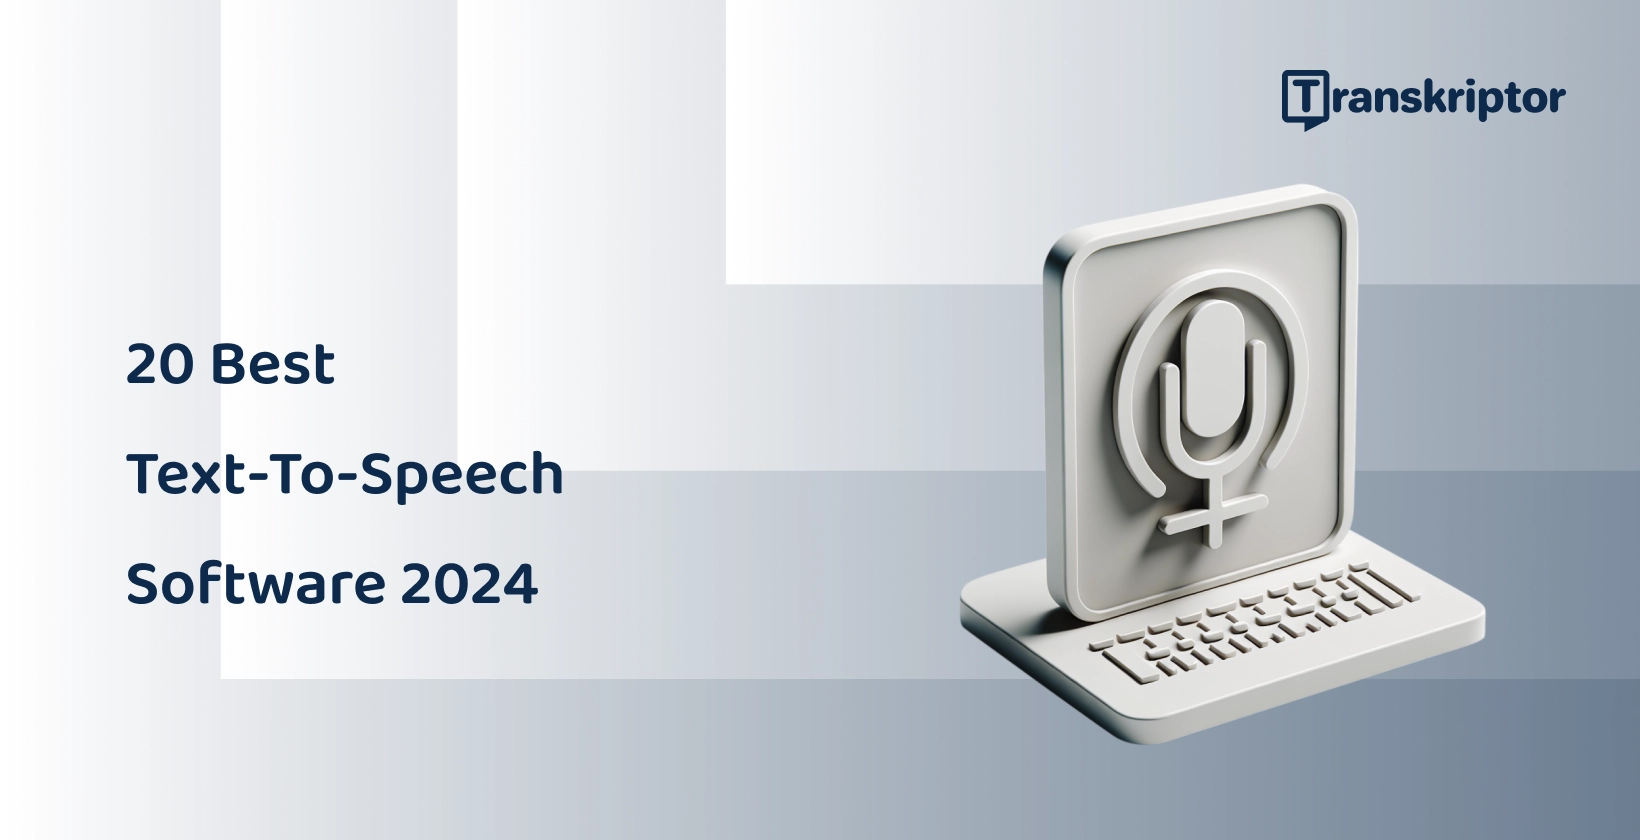 20 top text-to-speech applications in 2024, depicted with a microphone and keyboard graphic.